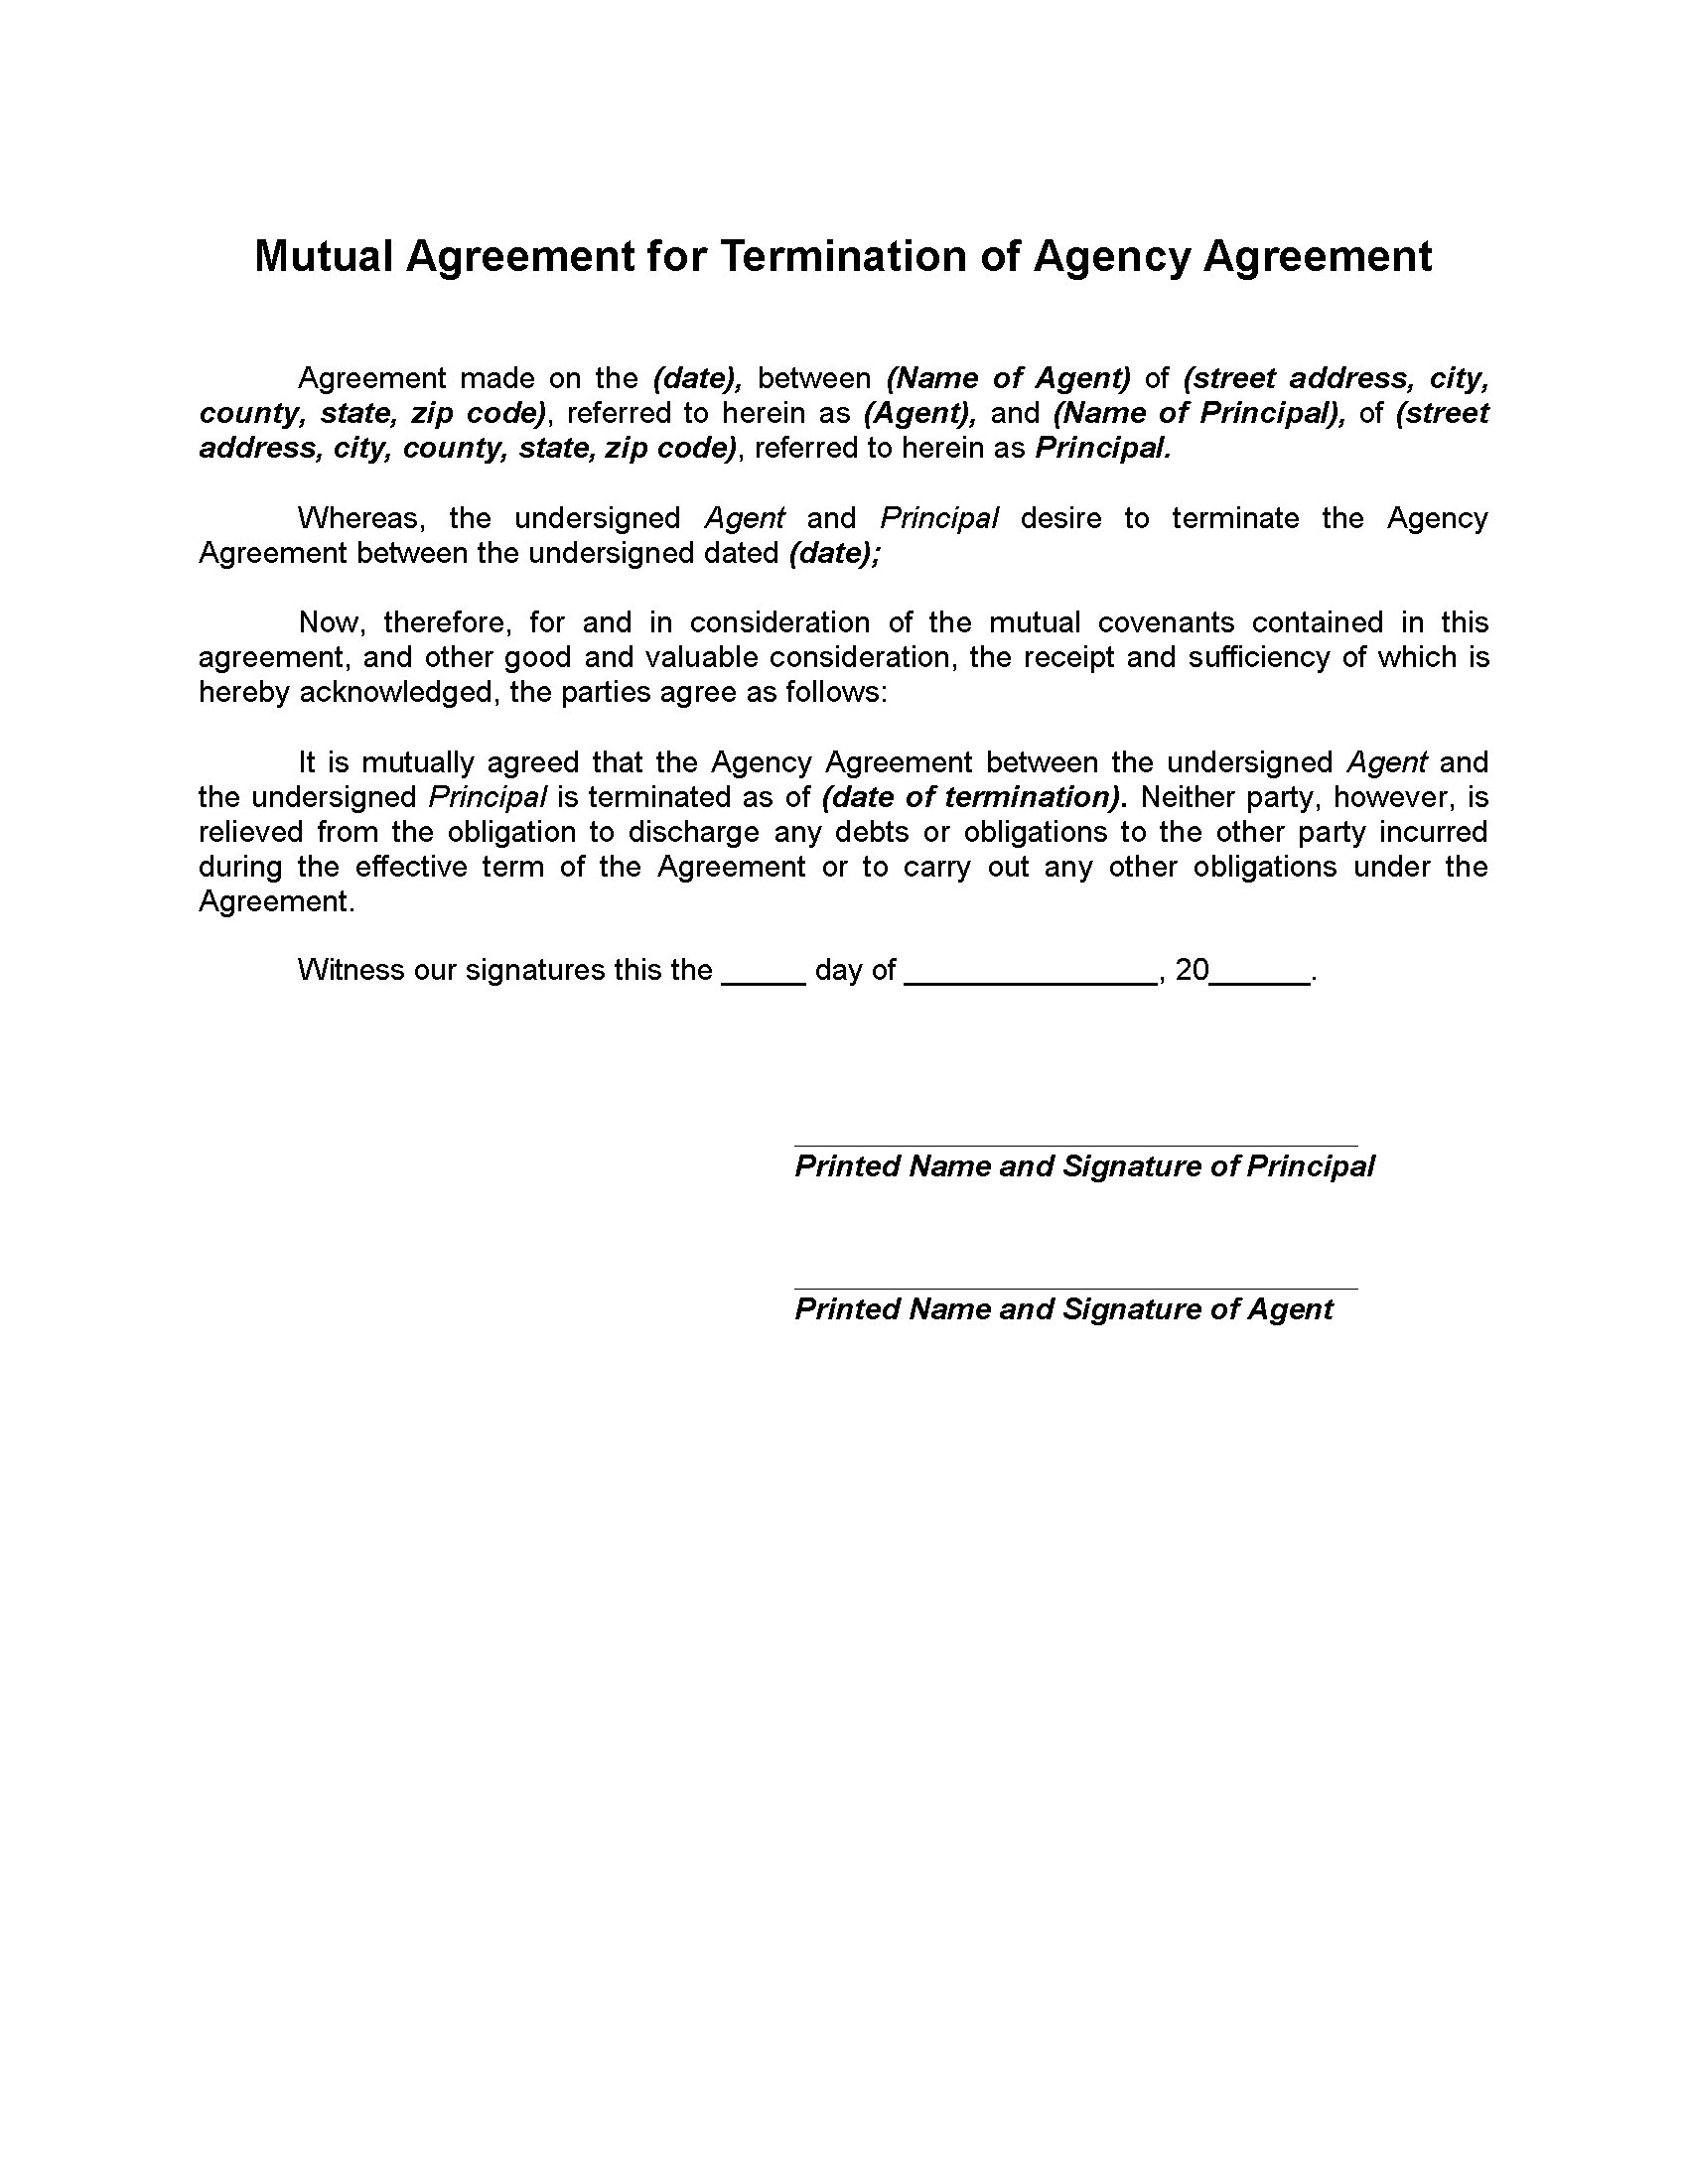 Agency Agreement Draft Mutual Termination Of Agency Agreement Legal Forms And Business